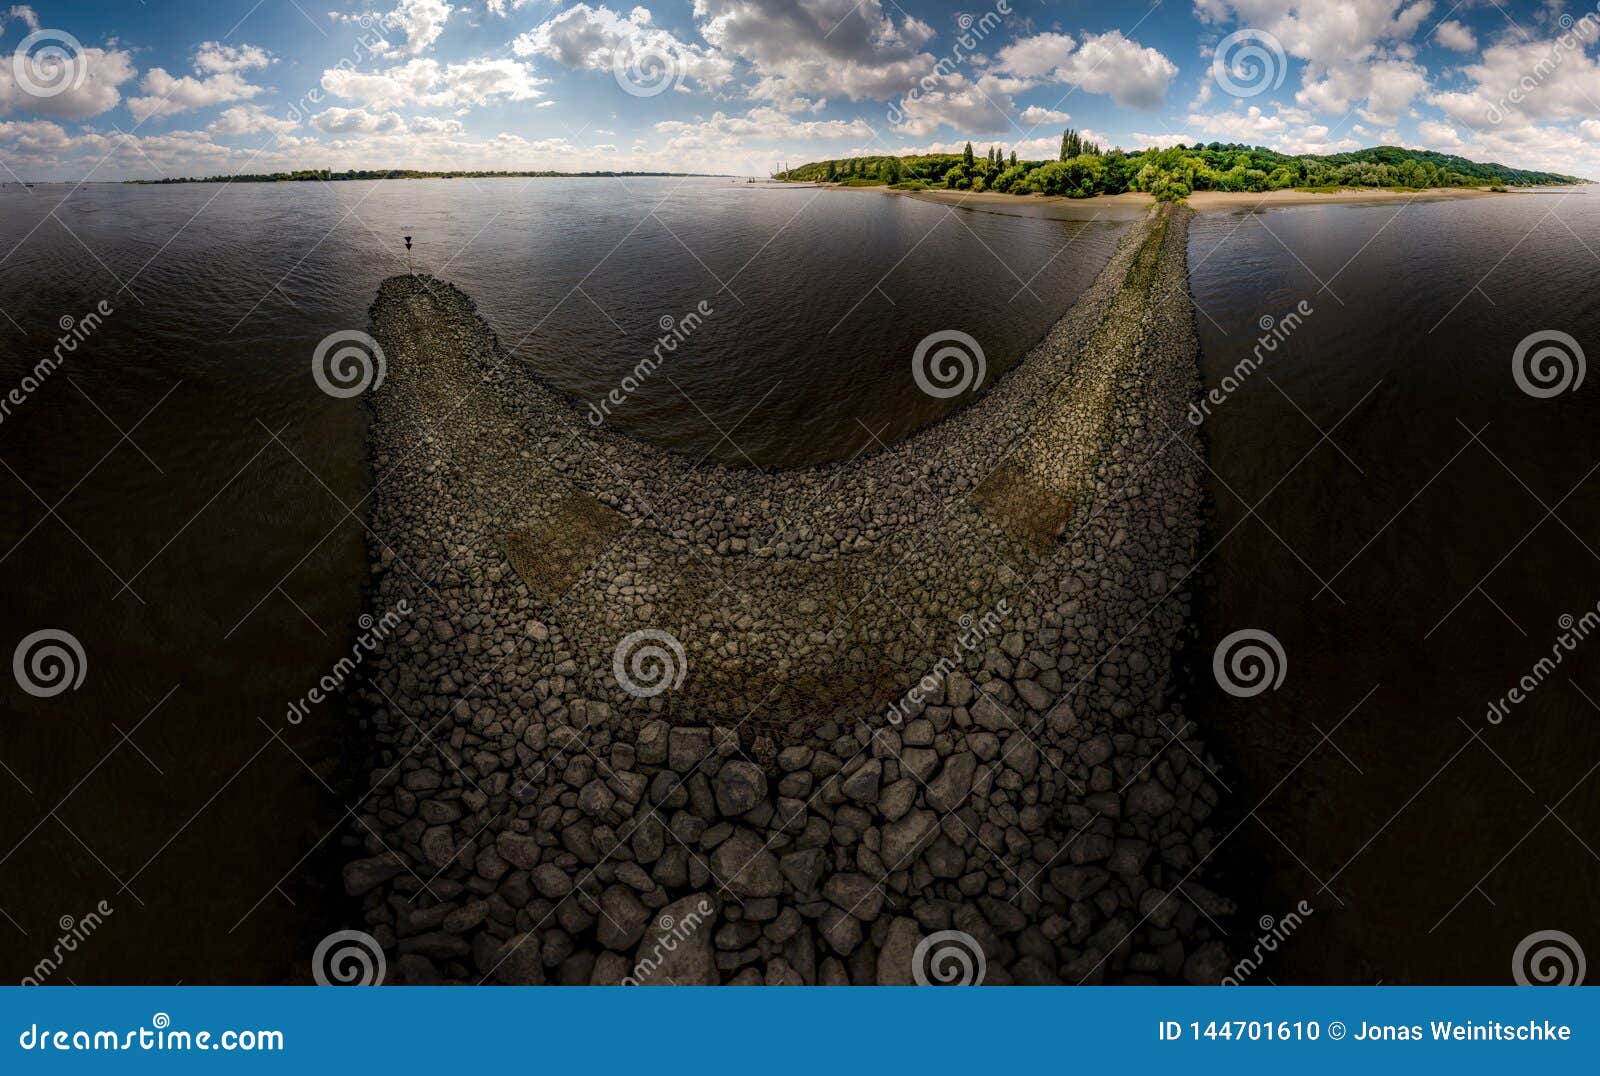 aerialview on the river elbe at stone dyke